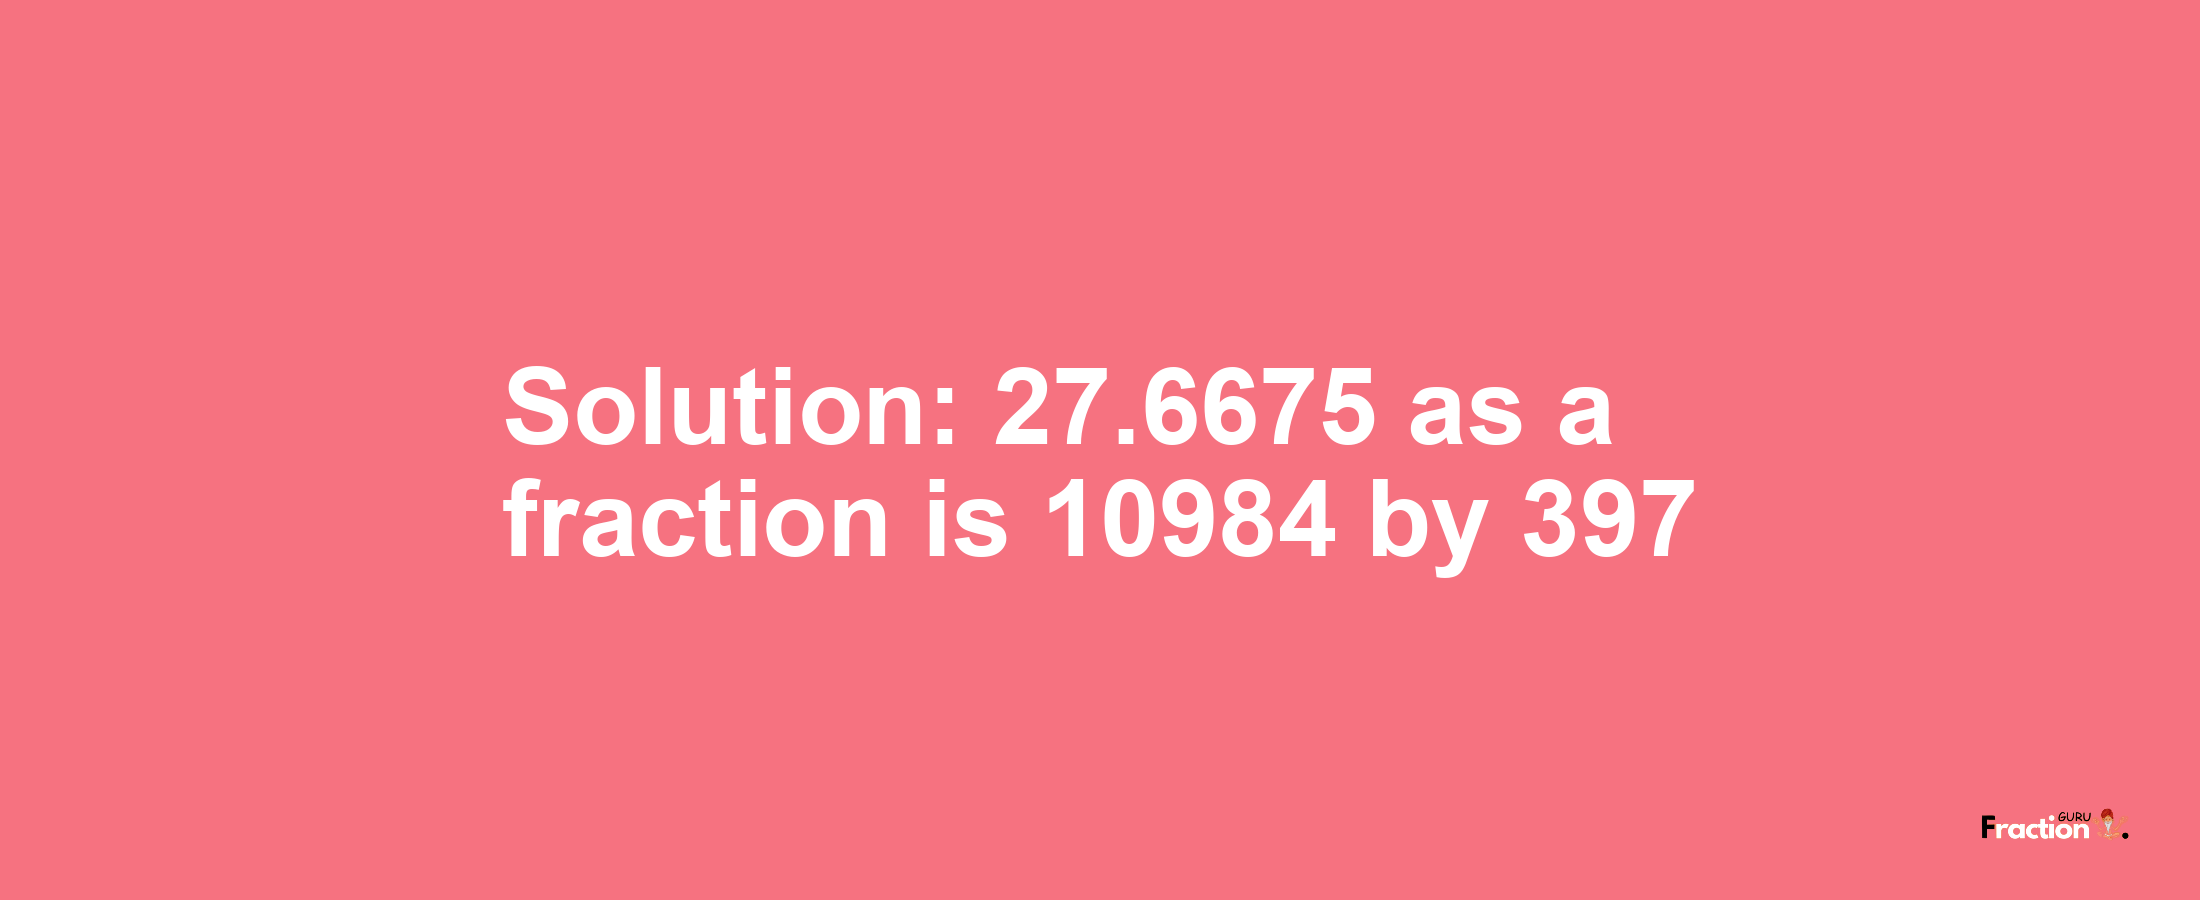 Solution:27.6675 as a fraction is 10984/397